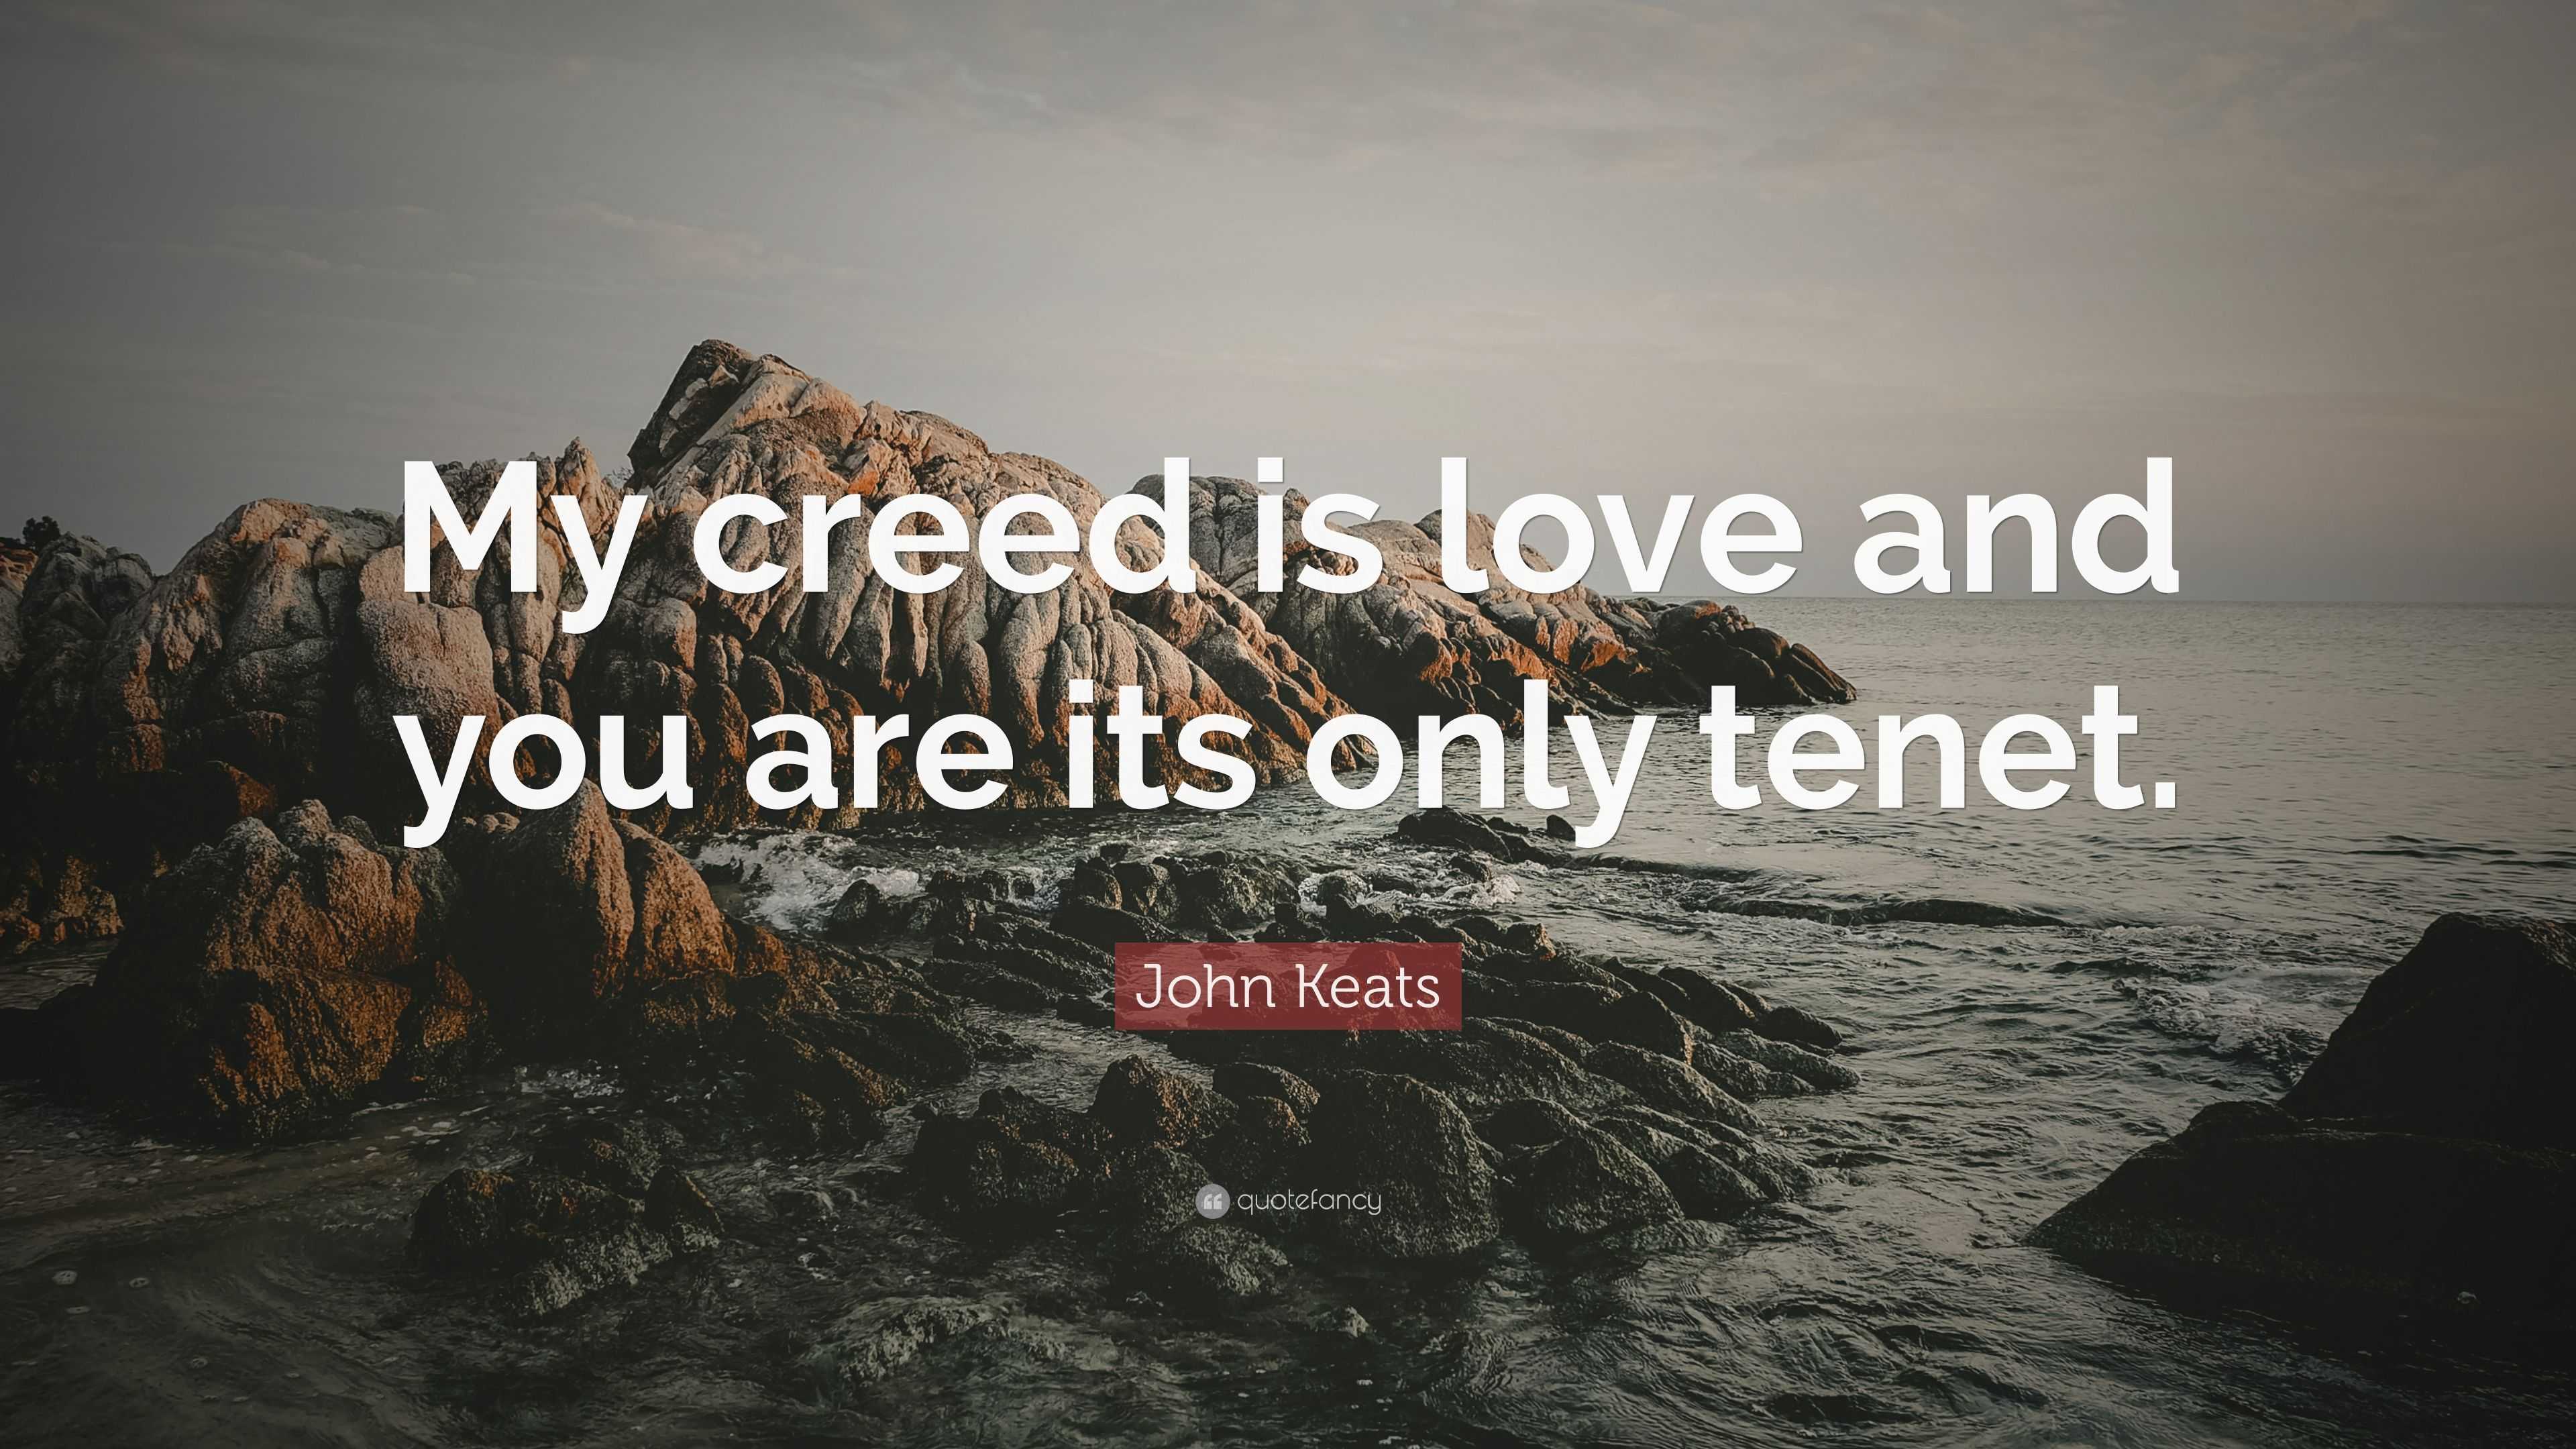 John Keats Quote: “My creed is love and you are its only tenet.”